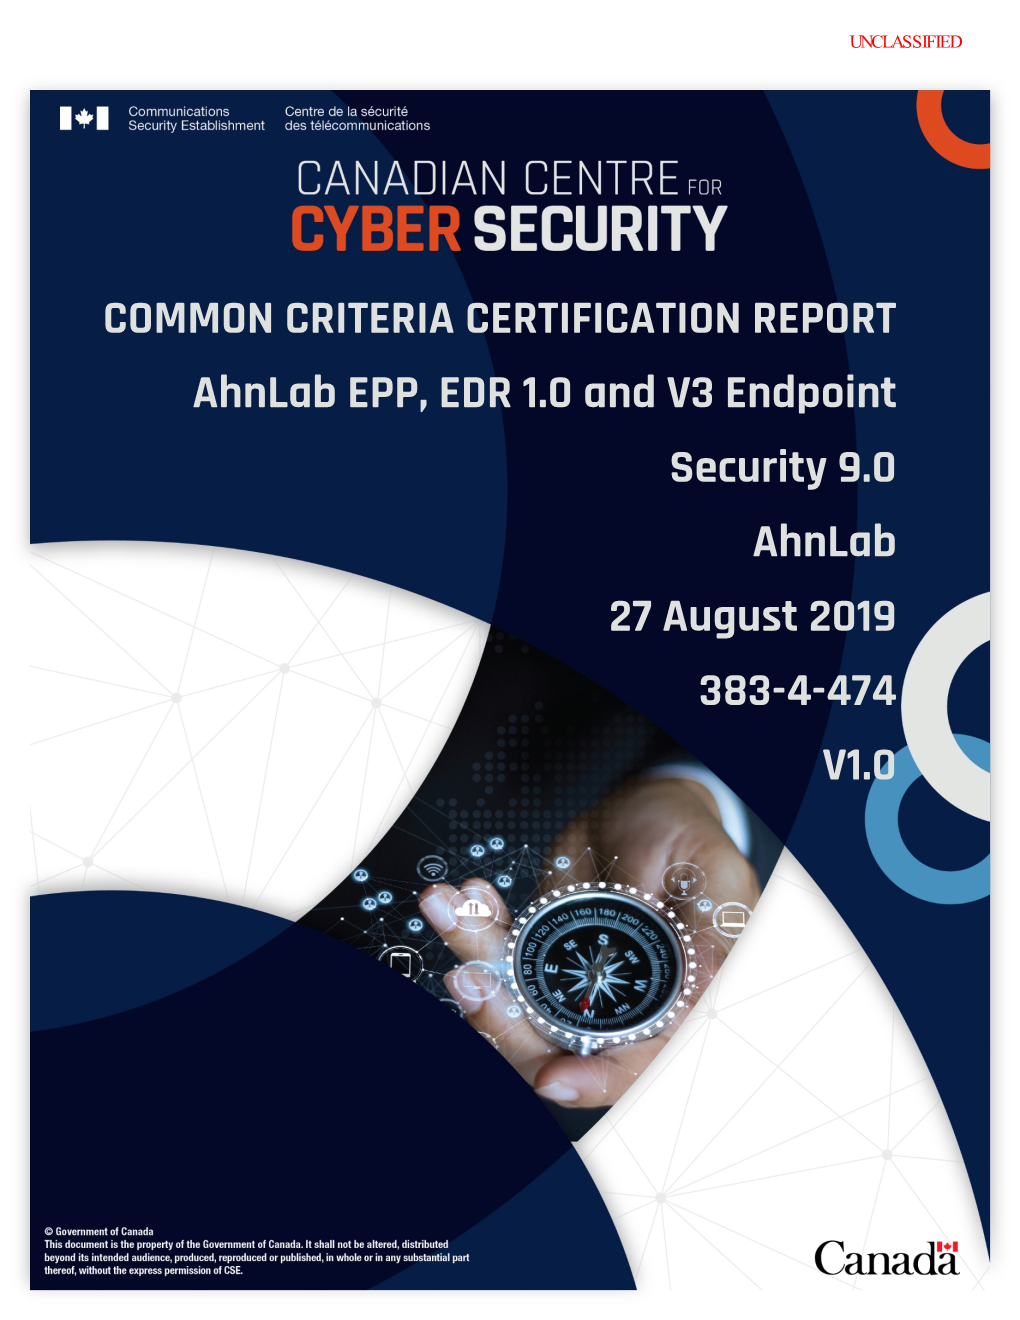 COMMON CRITERIA CERTIFICATION REPORT Ahnlab EPP, EDR 1.0 and V3 Endpoint Security 9.0 Ahnlab 27 August 2019 383-4-474 V1.0 UNCLASSIFIED